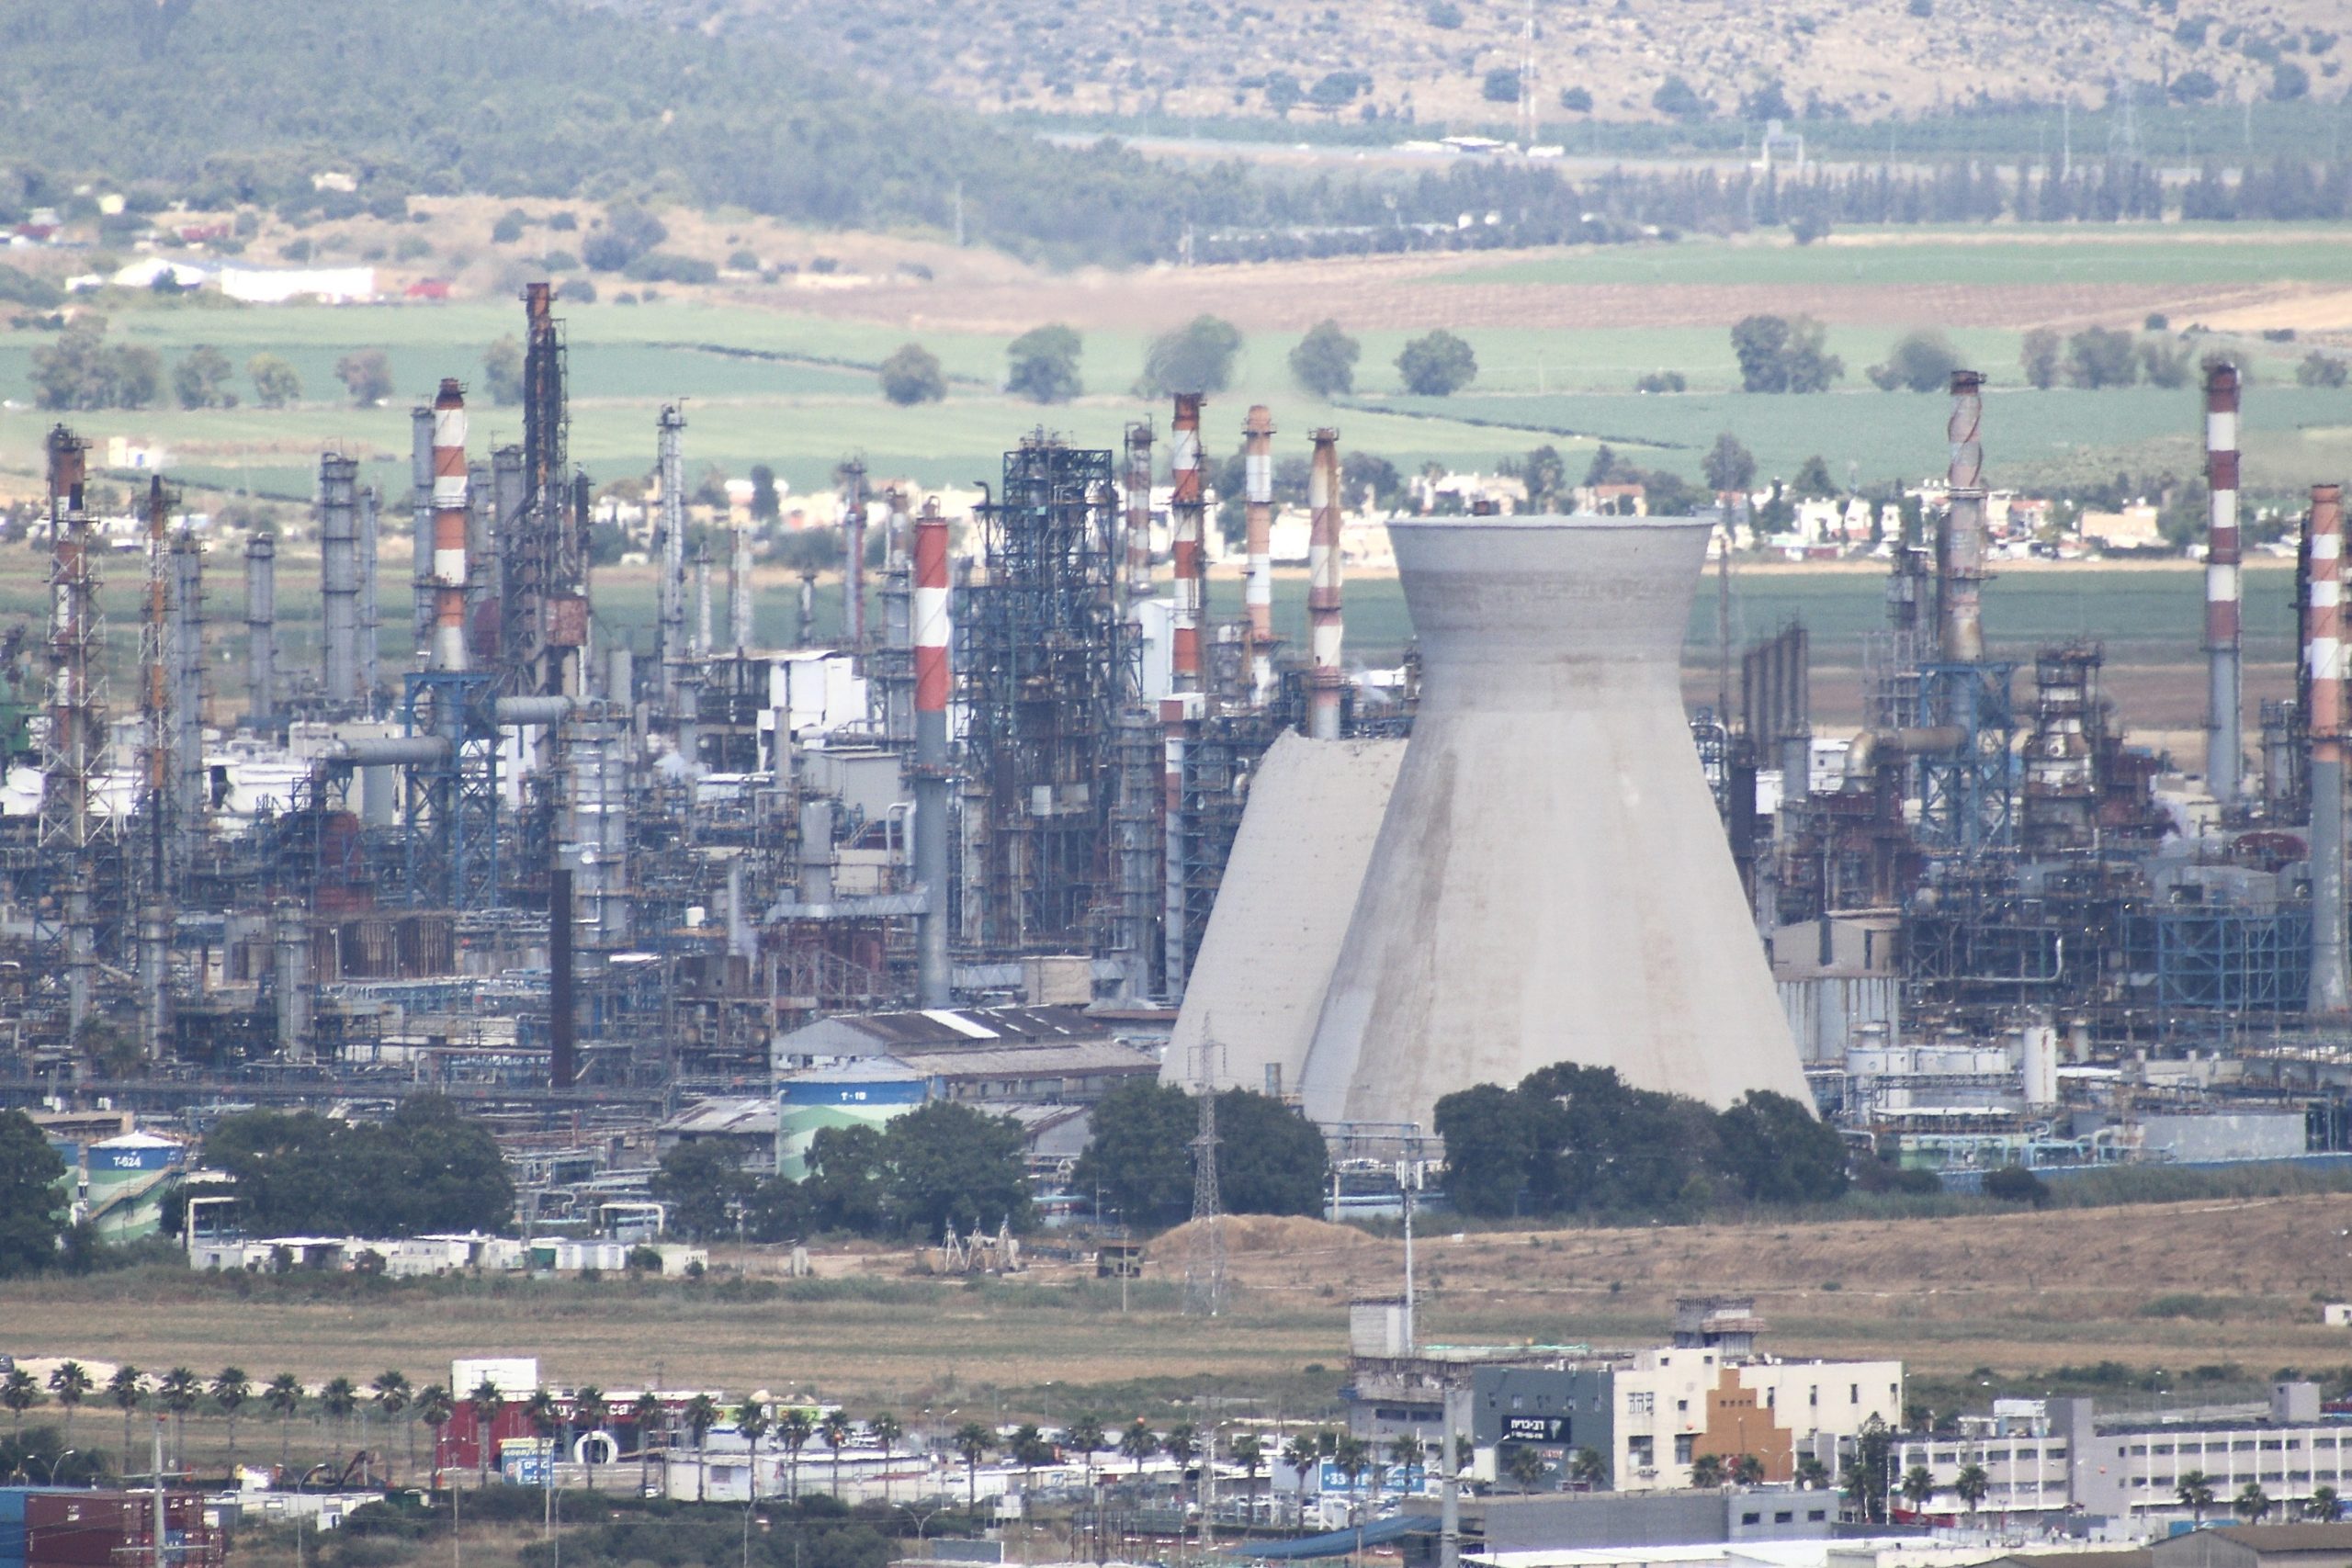 Collapse of cooling tower at Haifa Refinery (Bazan Group)